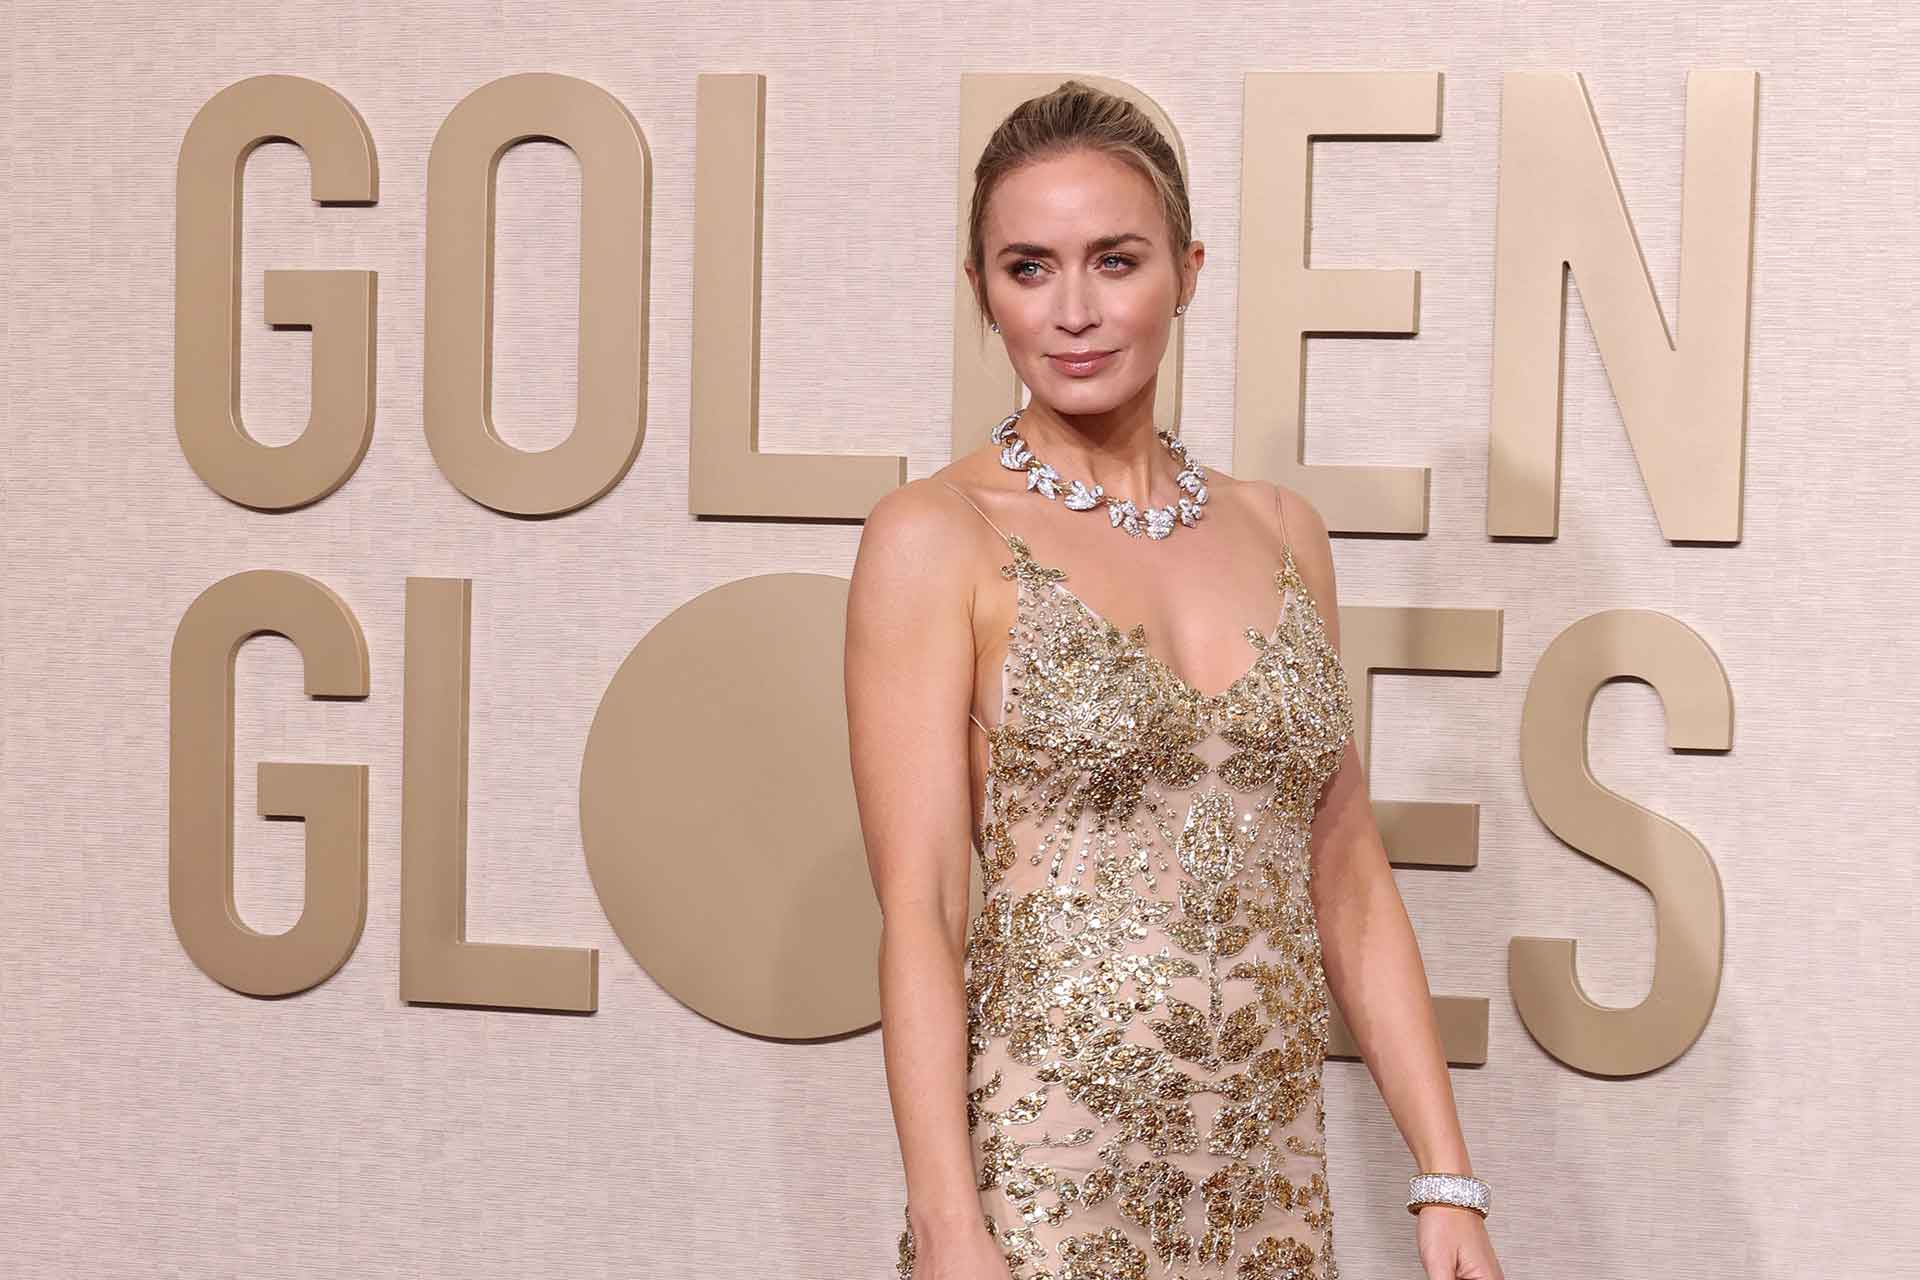 Emily Bunt in a gold sparkly dress at the Golden Globes.